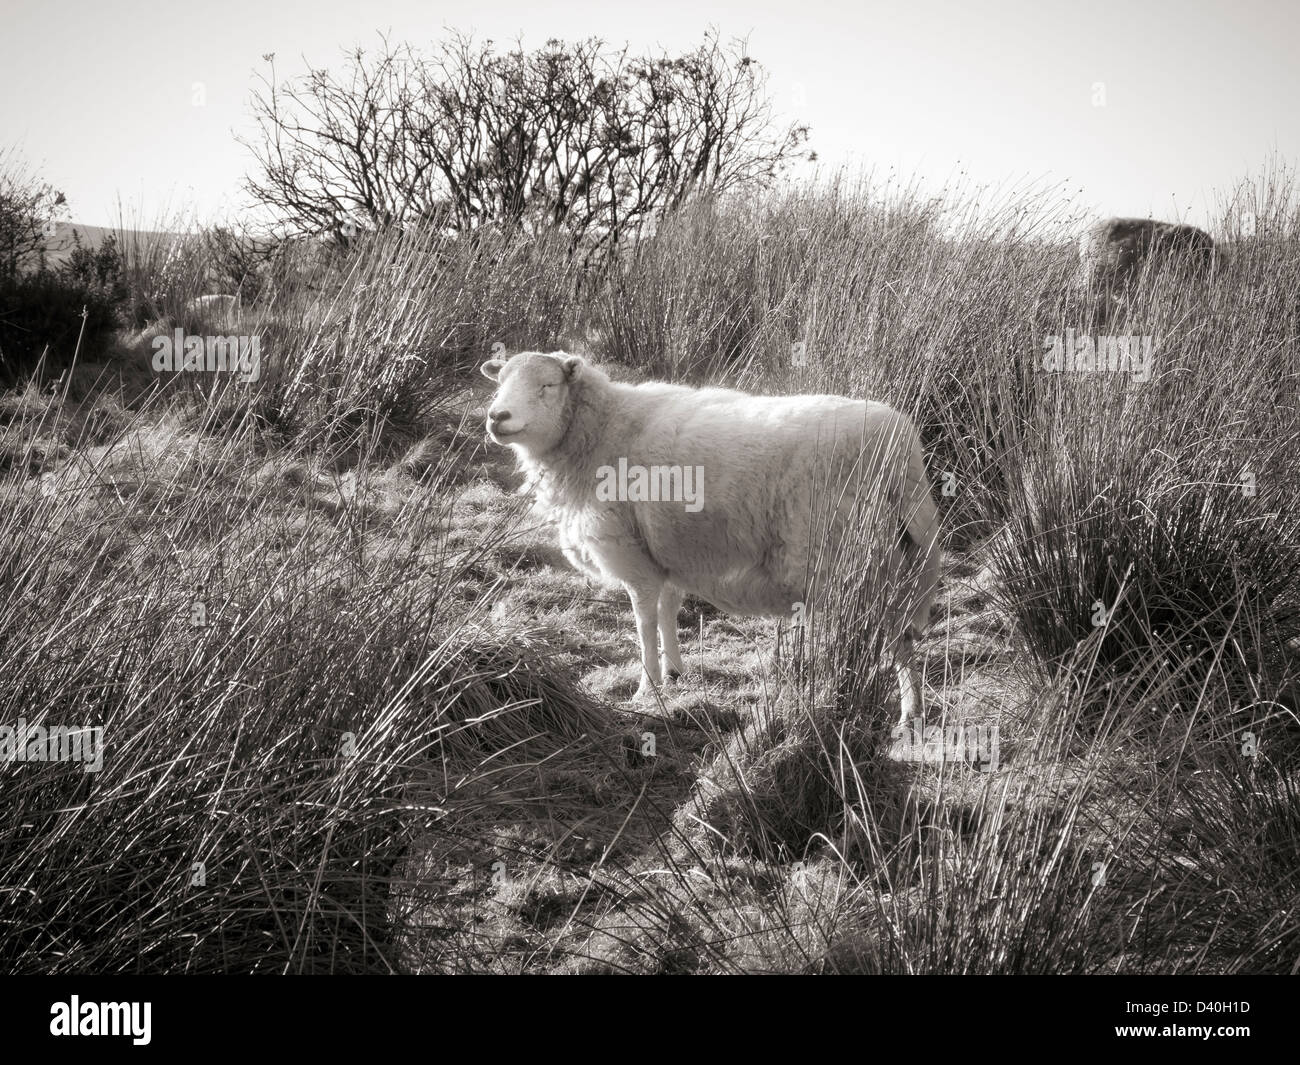 Monochrome image of a sheep back lit standing on rough ground with grass and gorse Stock Photo